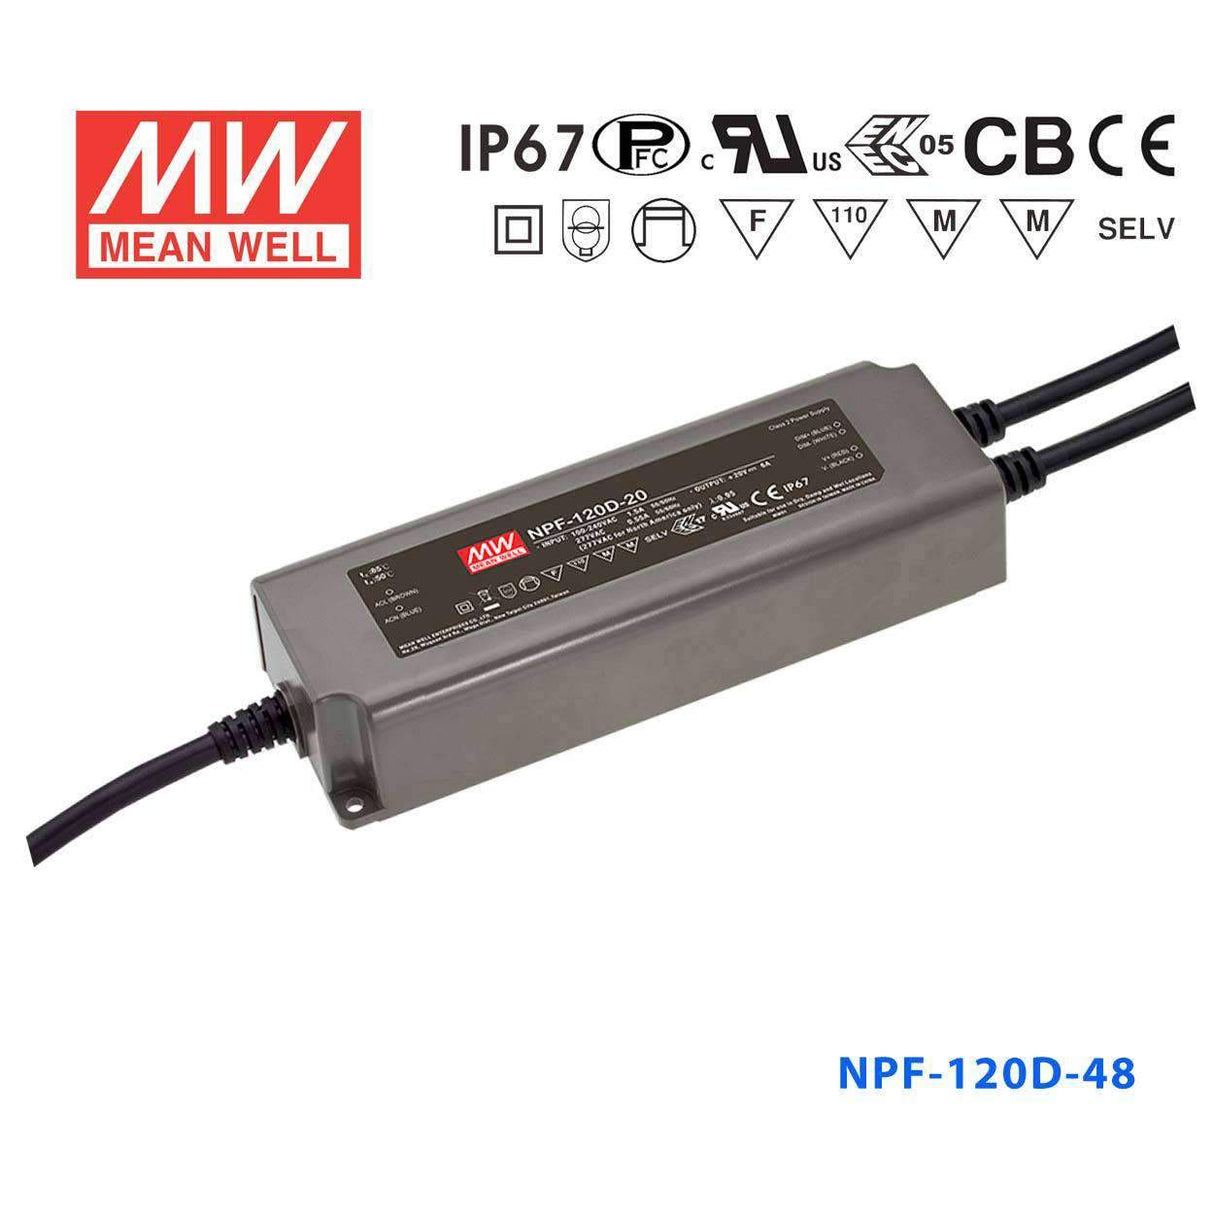 Mean Well NPF-120D-48 Power Supply 120W 48V - Dimmable